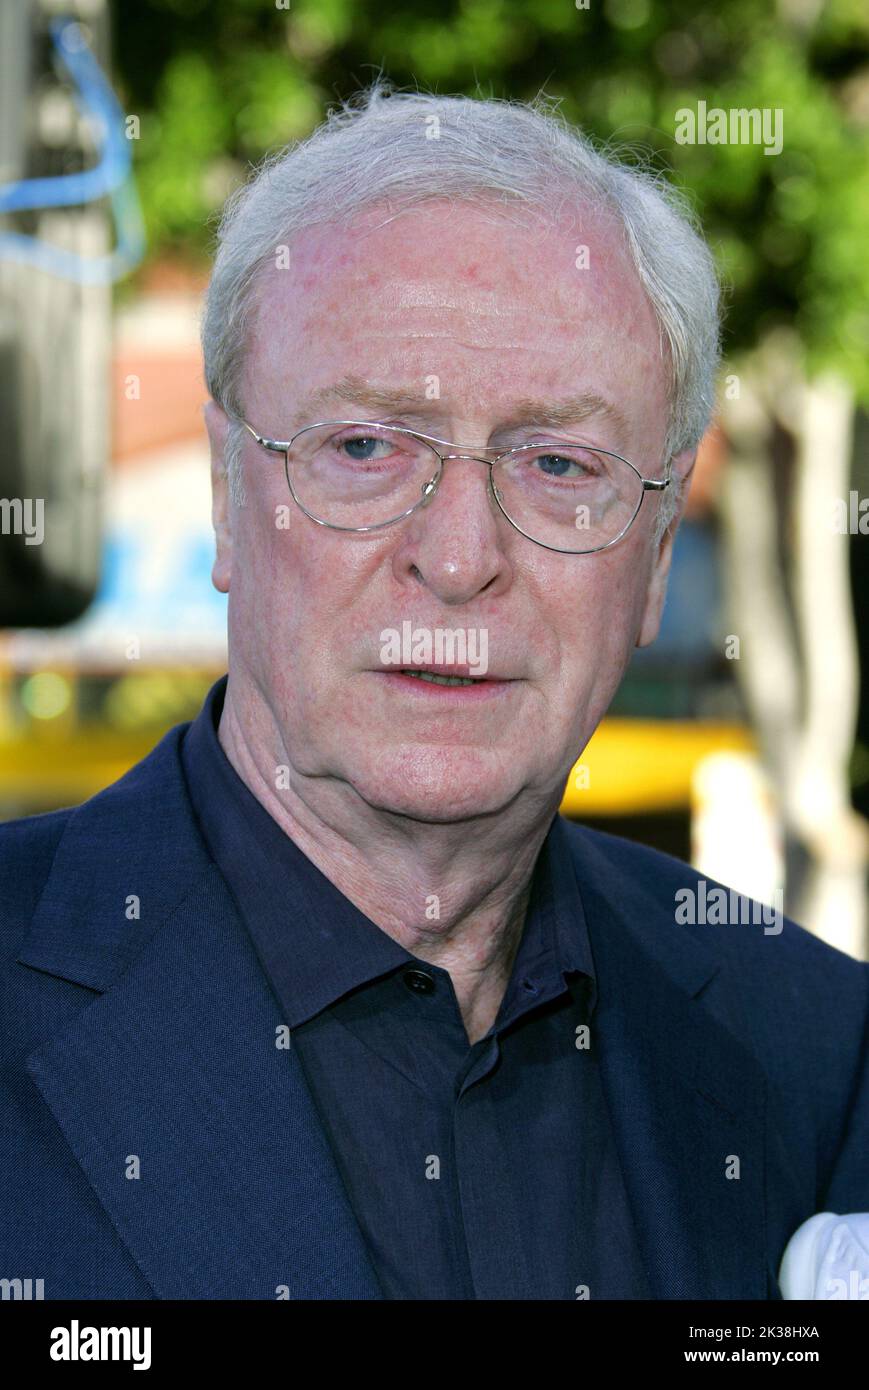 SIR MICHAEL CAINE ACTOR BATMAN BEGINS CHINESE THEATRE, HOLLYWOOD LOS ANGELES, USA 06/06/2005 LAM51612 Stock Photo